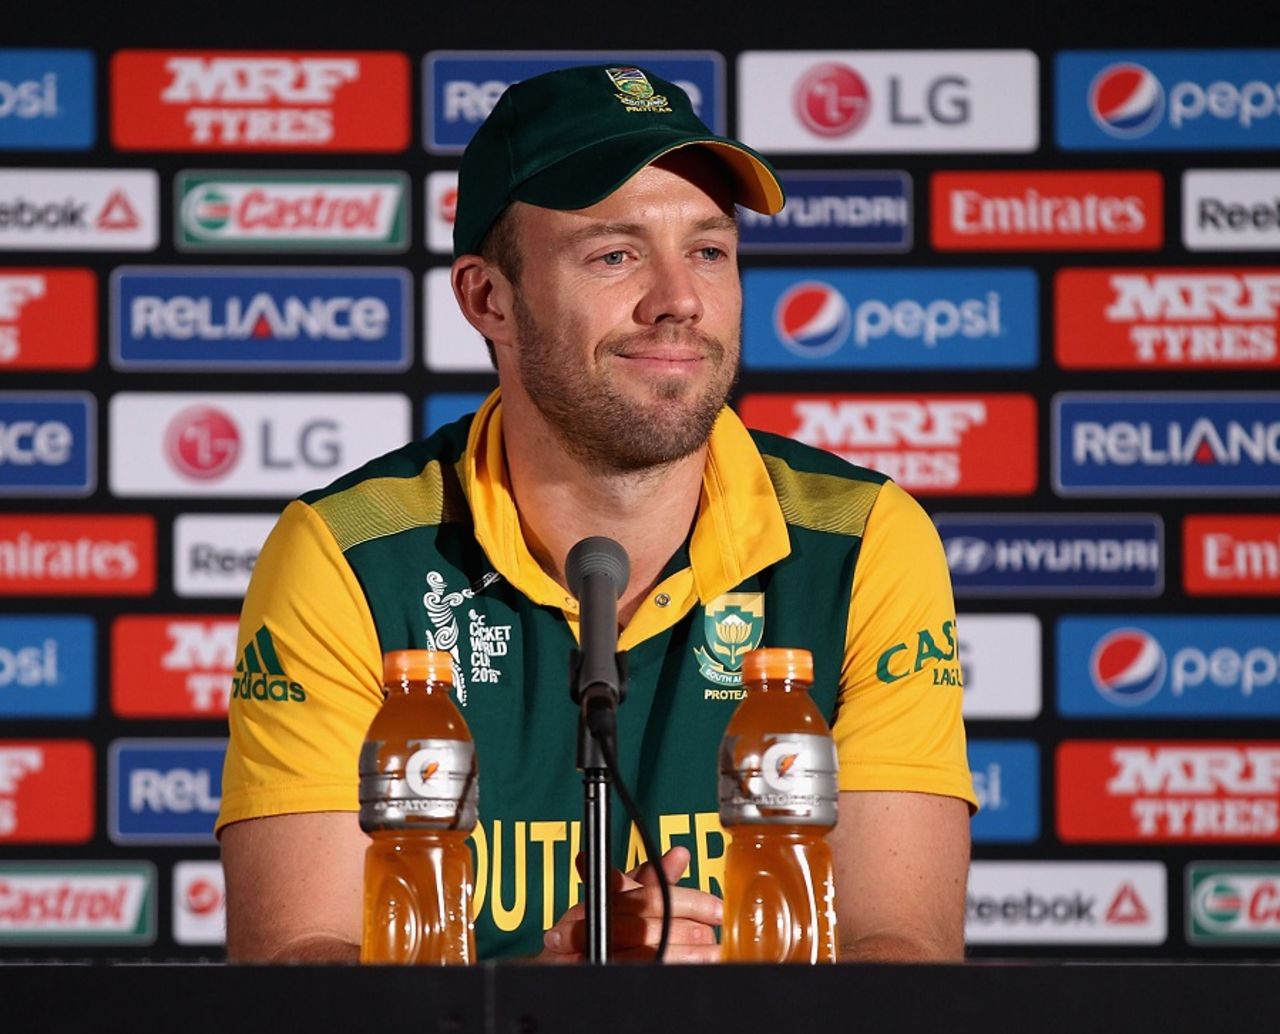 AB de Villiers speaks to the media after South Africa's crushing defeat, India v South Africa, World Cup 2015, Group B, Melbourne, February 22, 2015